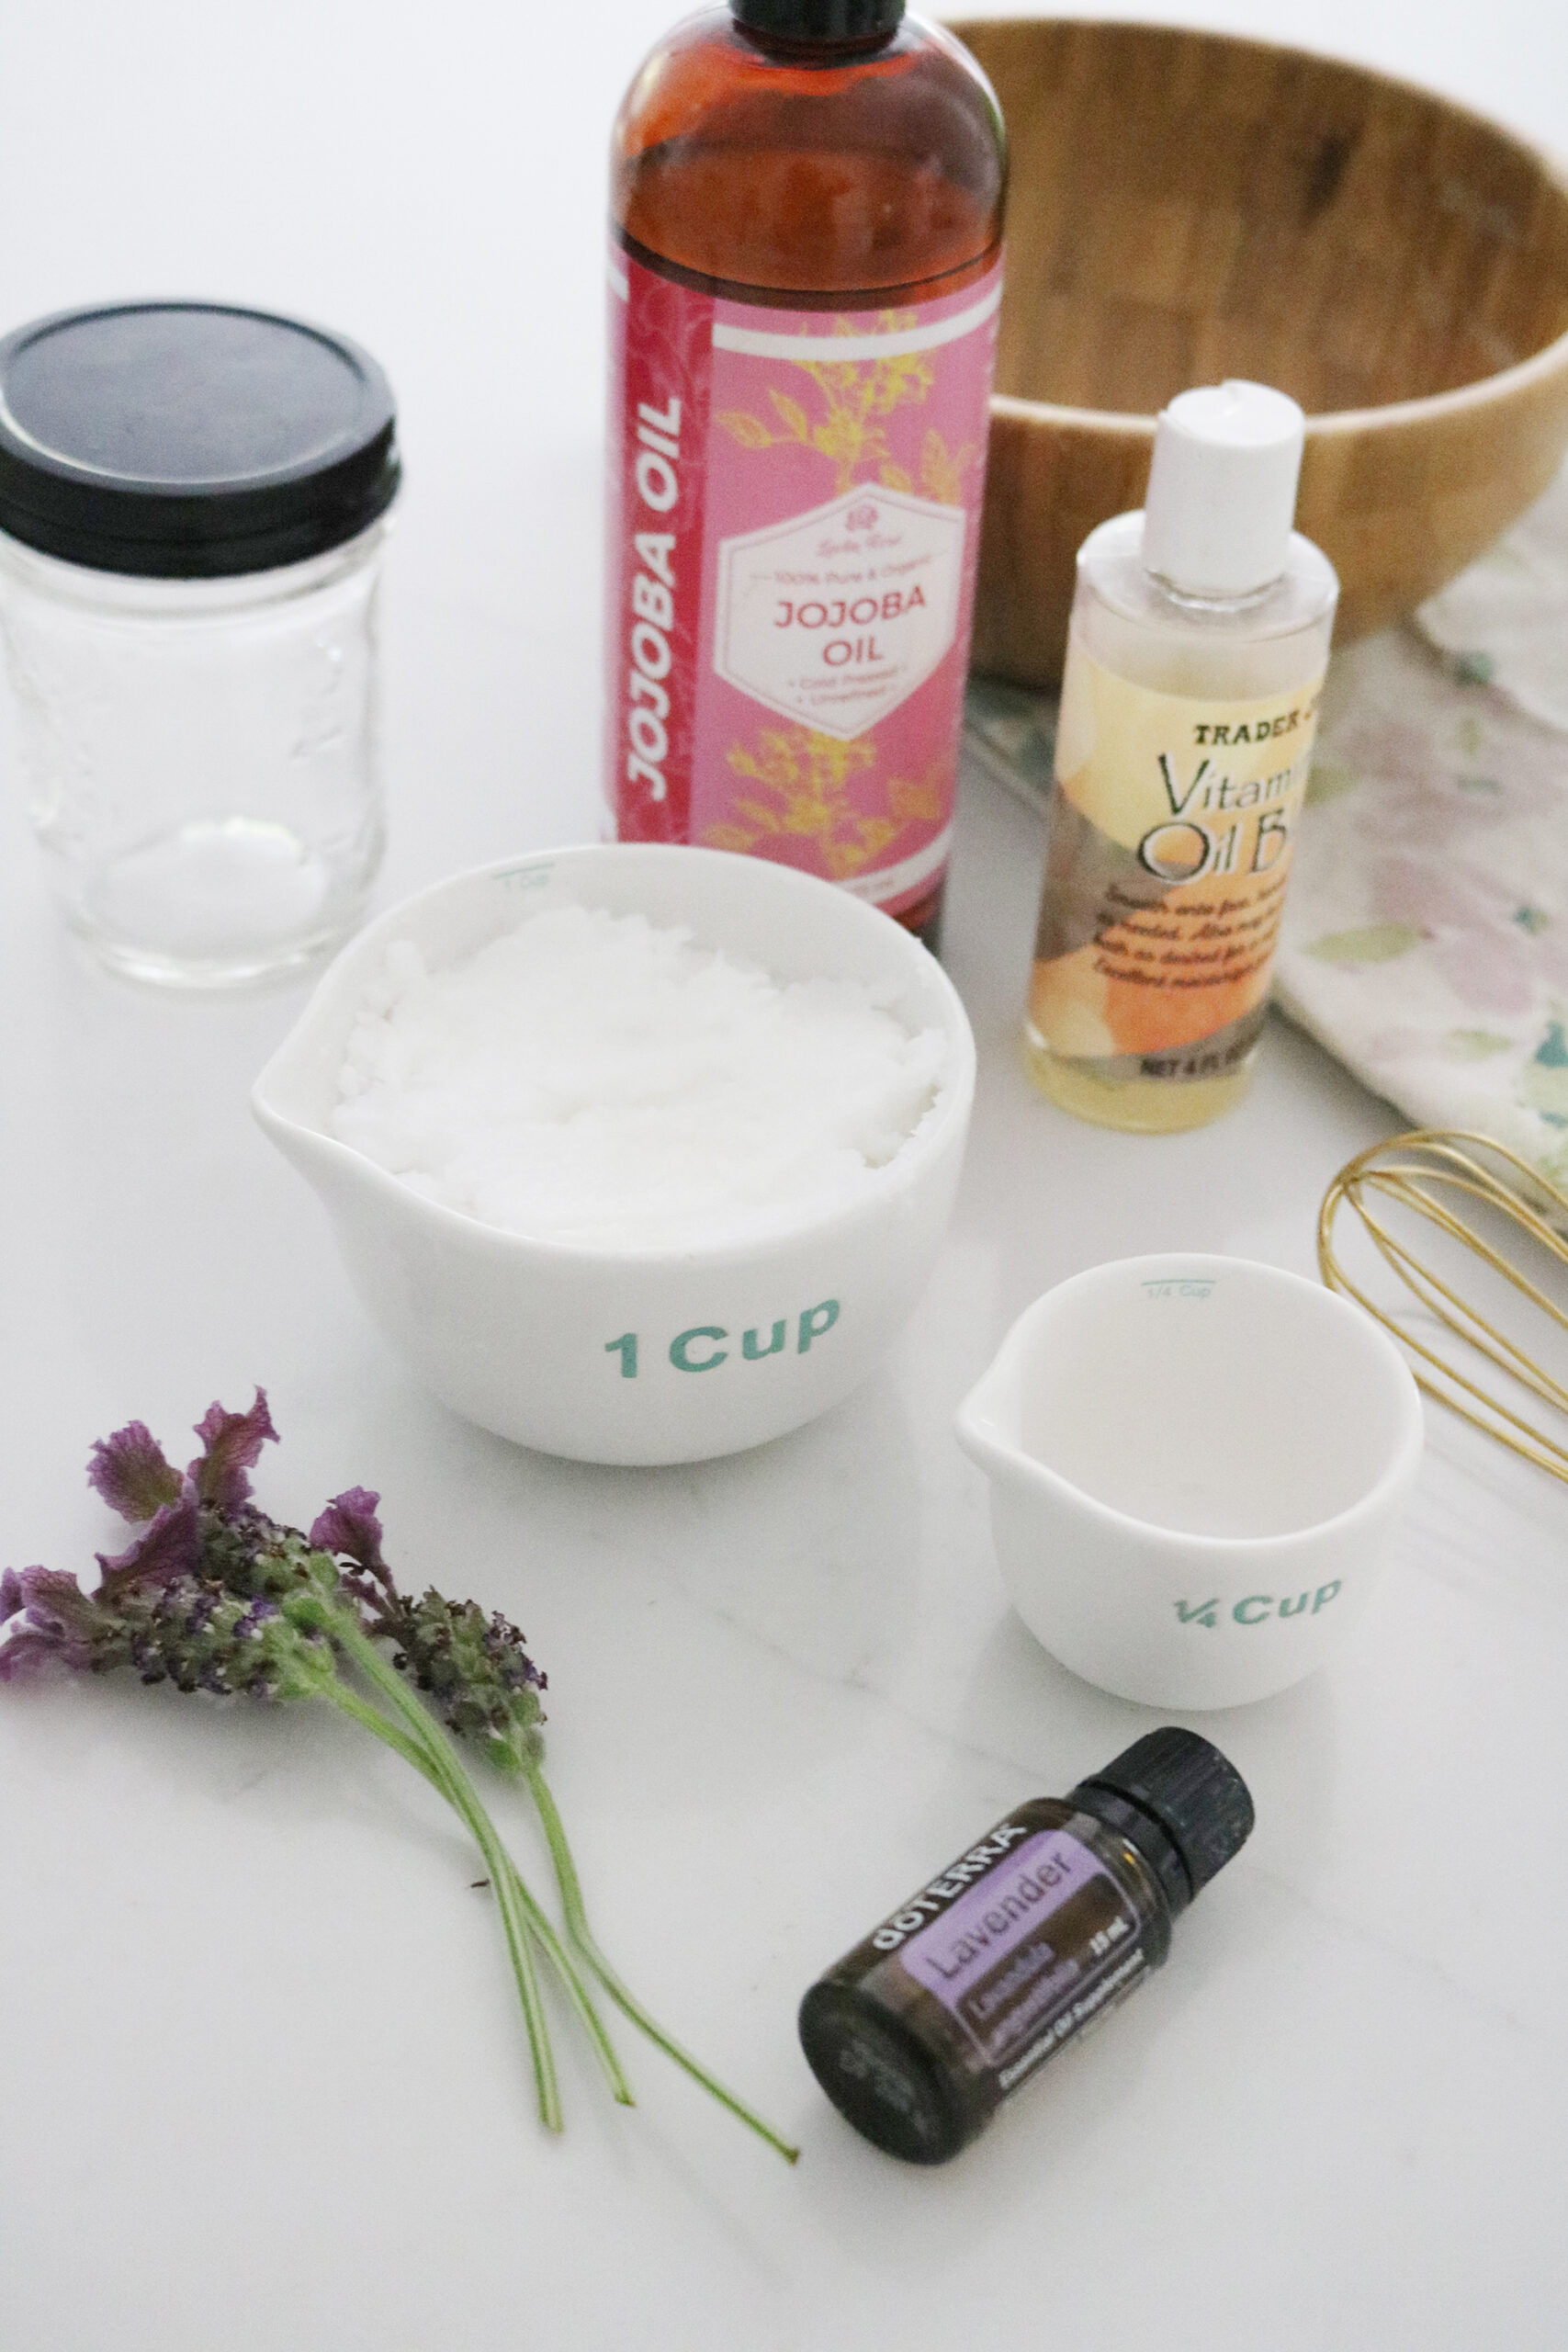 Coconut Body Cream  with lavender and jojoba oil and vitamin E oil that Helps Heal the Skin and Nails to enjoy and use everyday.  Will not clog but add healthy benefits to your skin and nails. || Darling Darleen Top CT Lifestyle Blogger